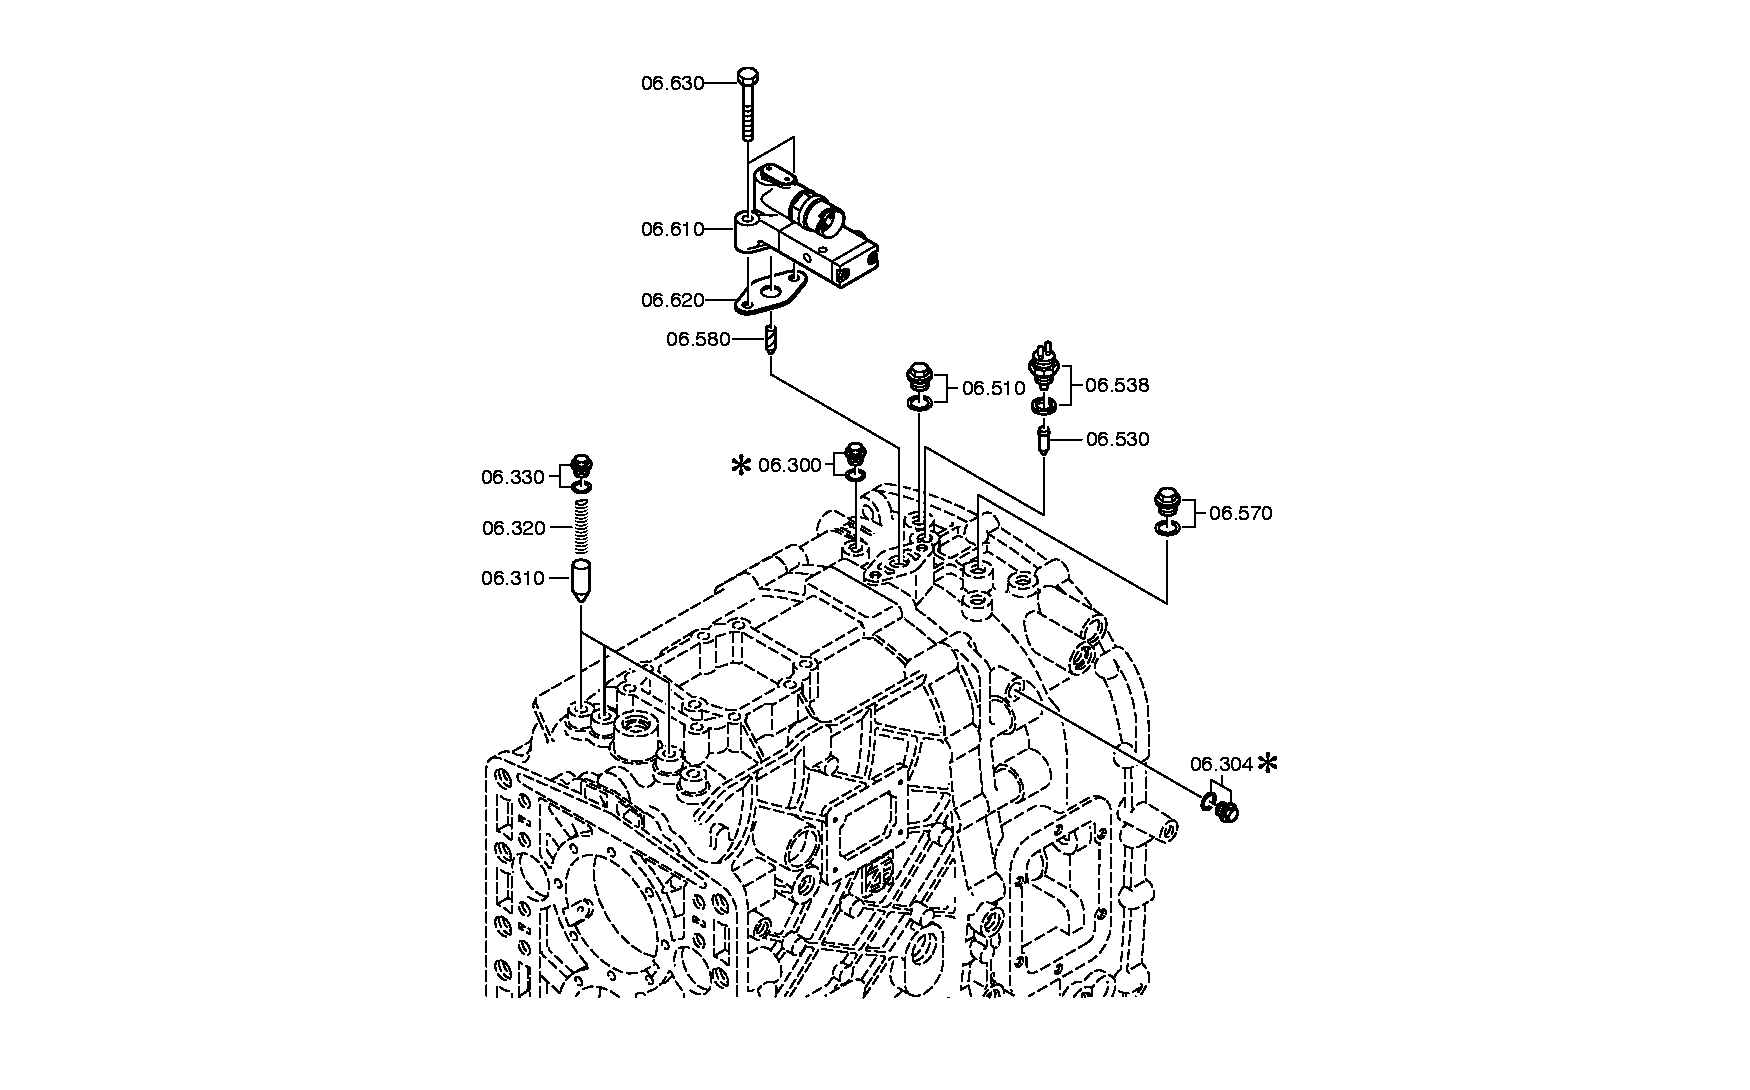 drawing for ASIA MOTORS CO. INC. 409-01-0029 - PIN (figure 2)